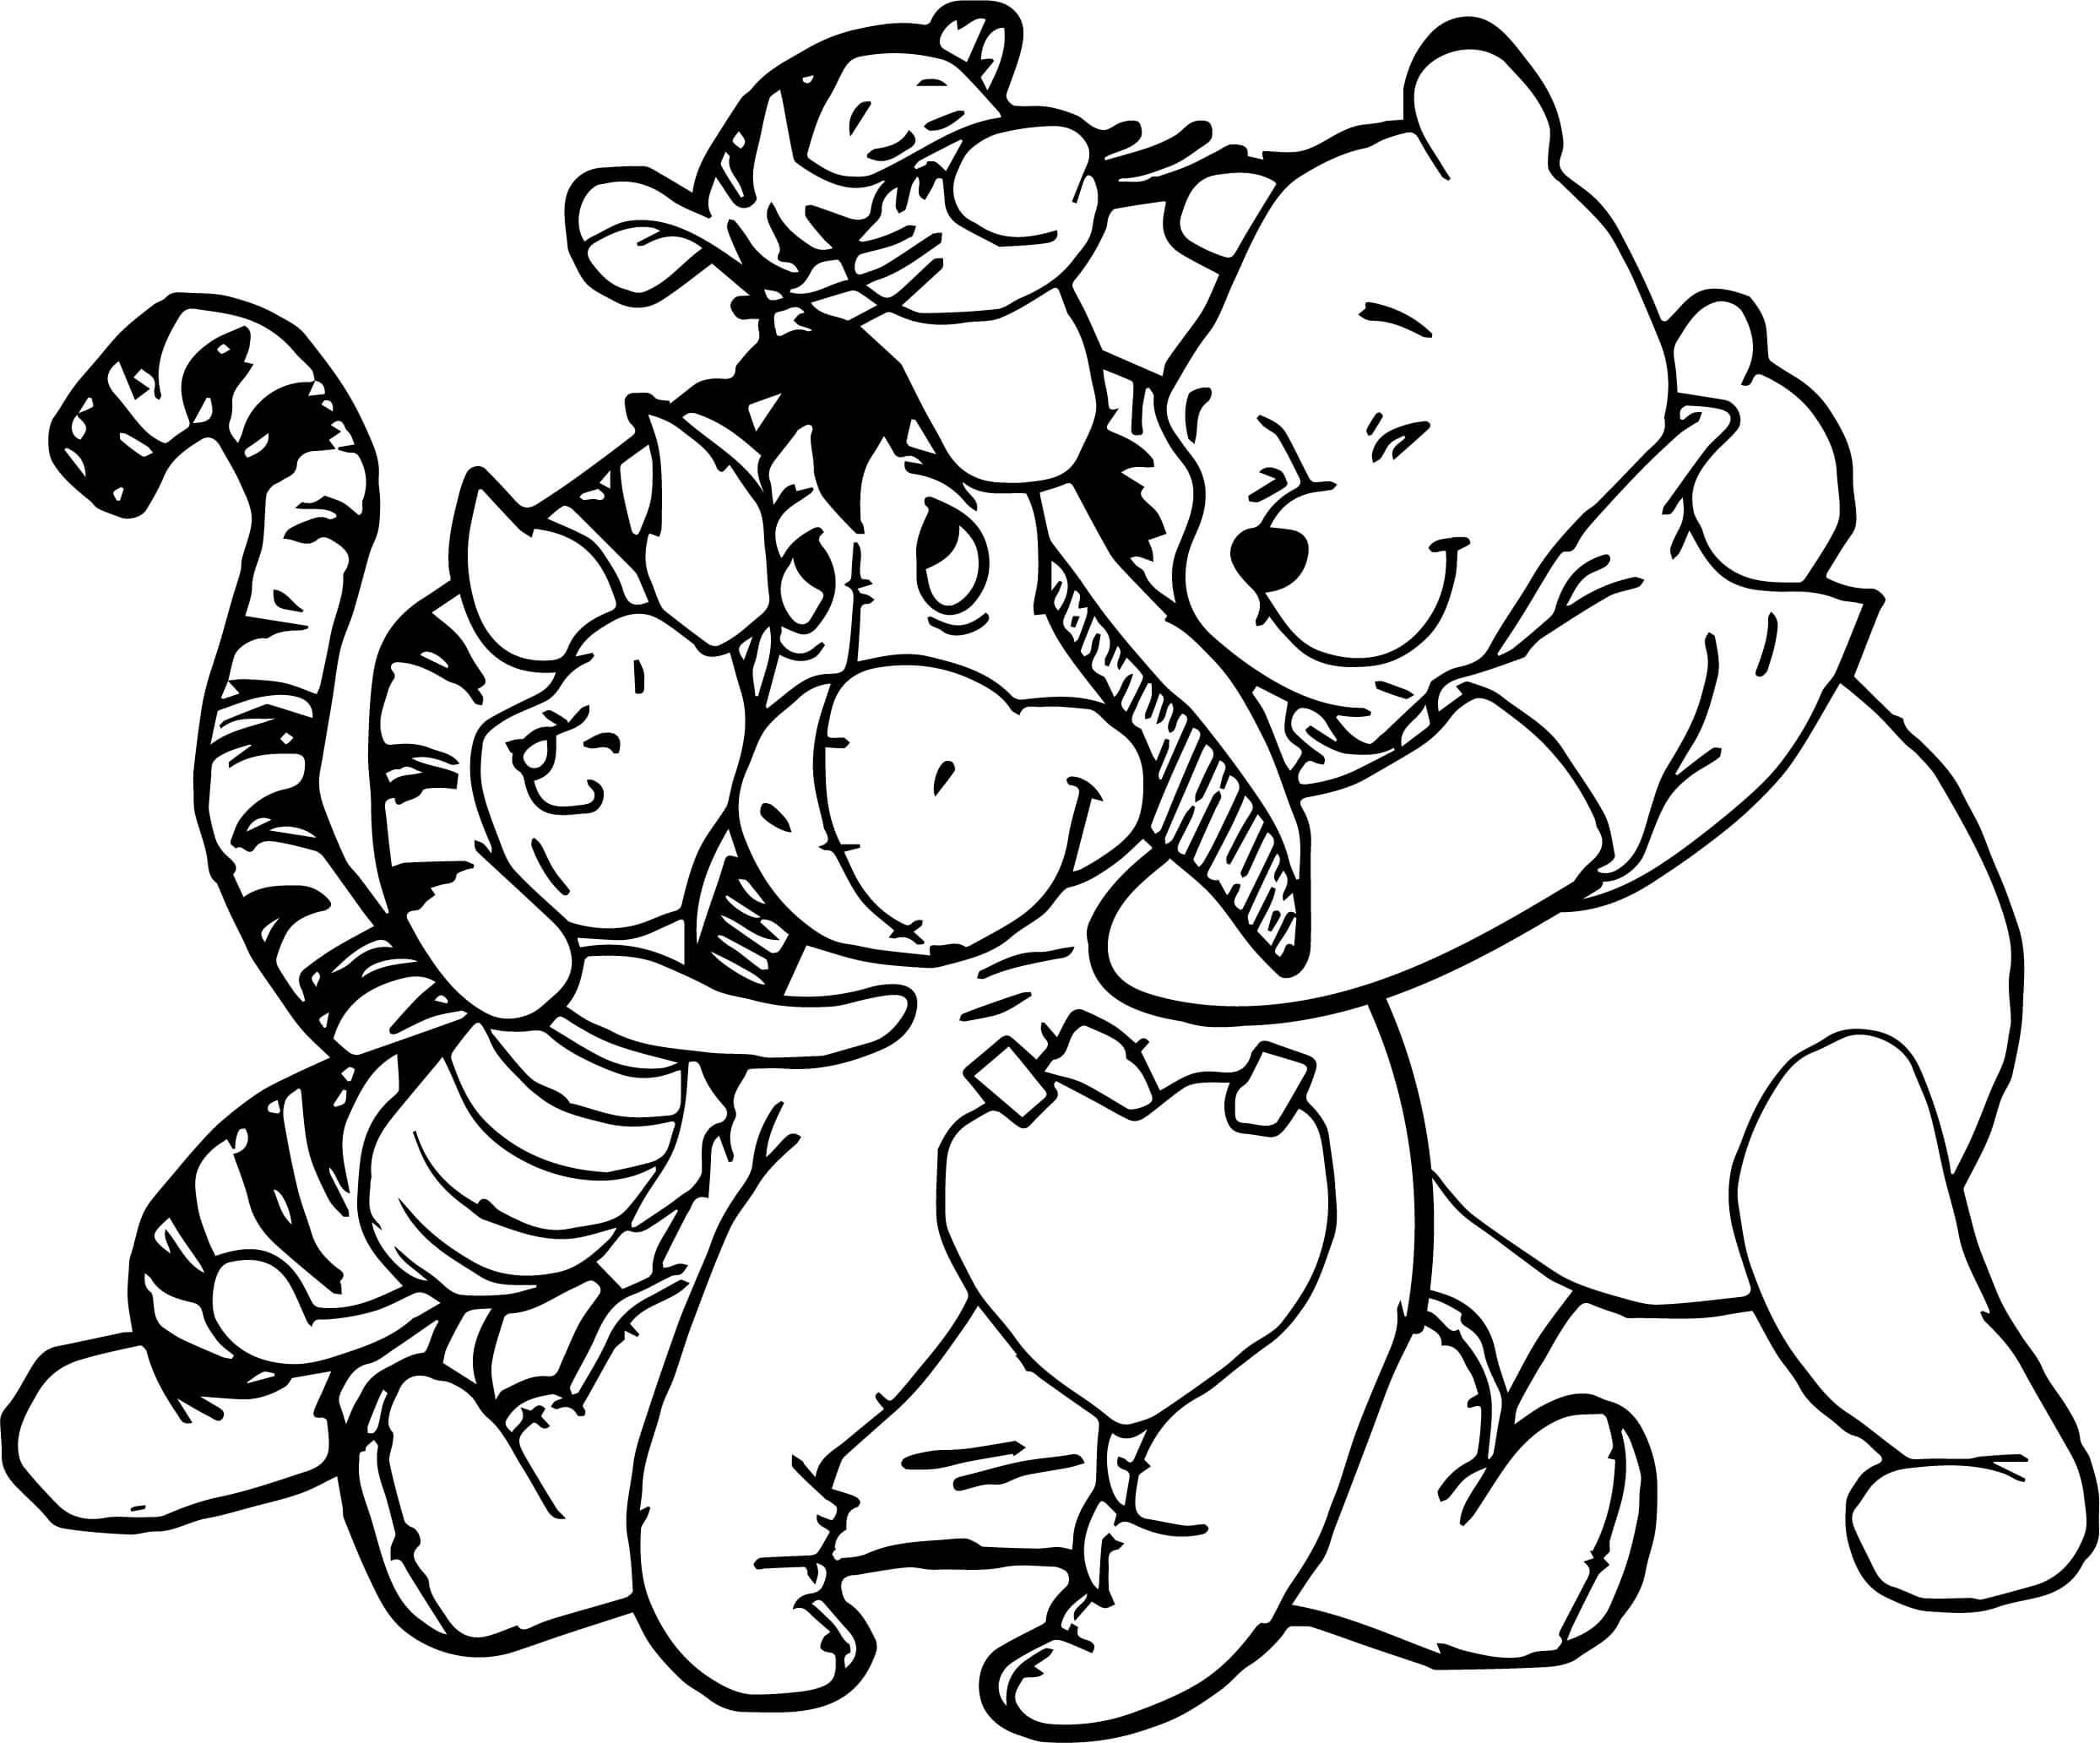 Love Winnie the Pooh Coloring Pages